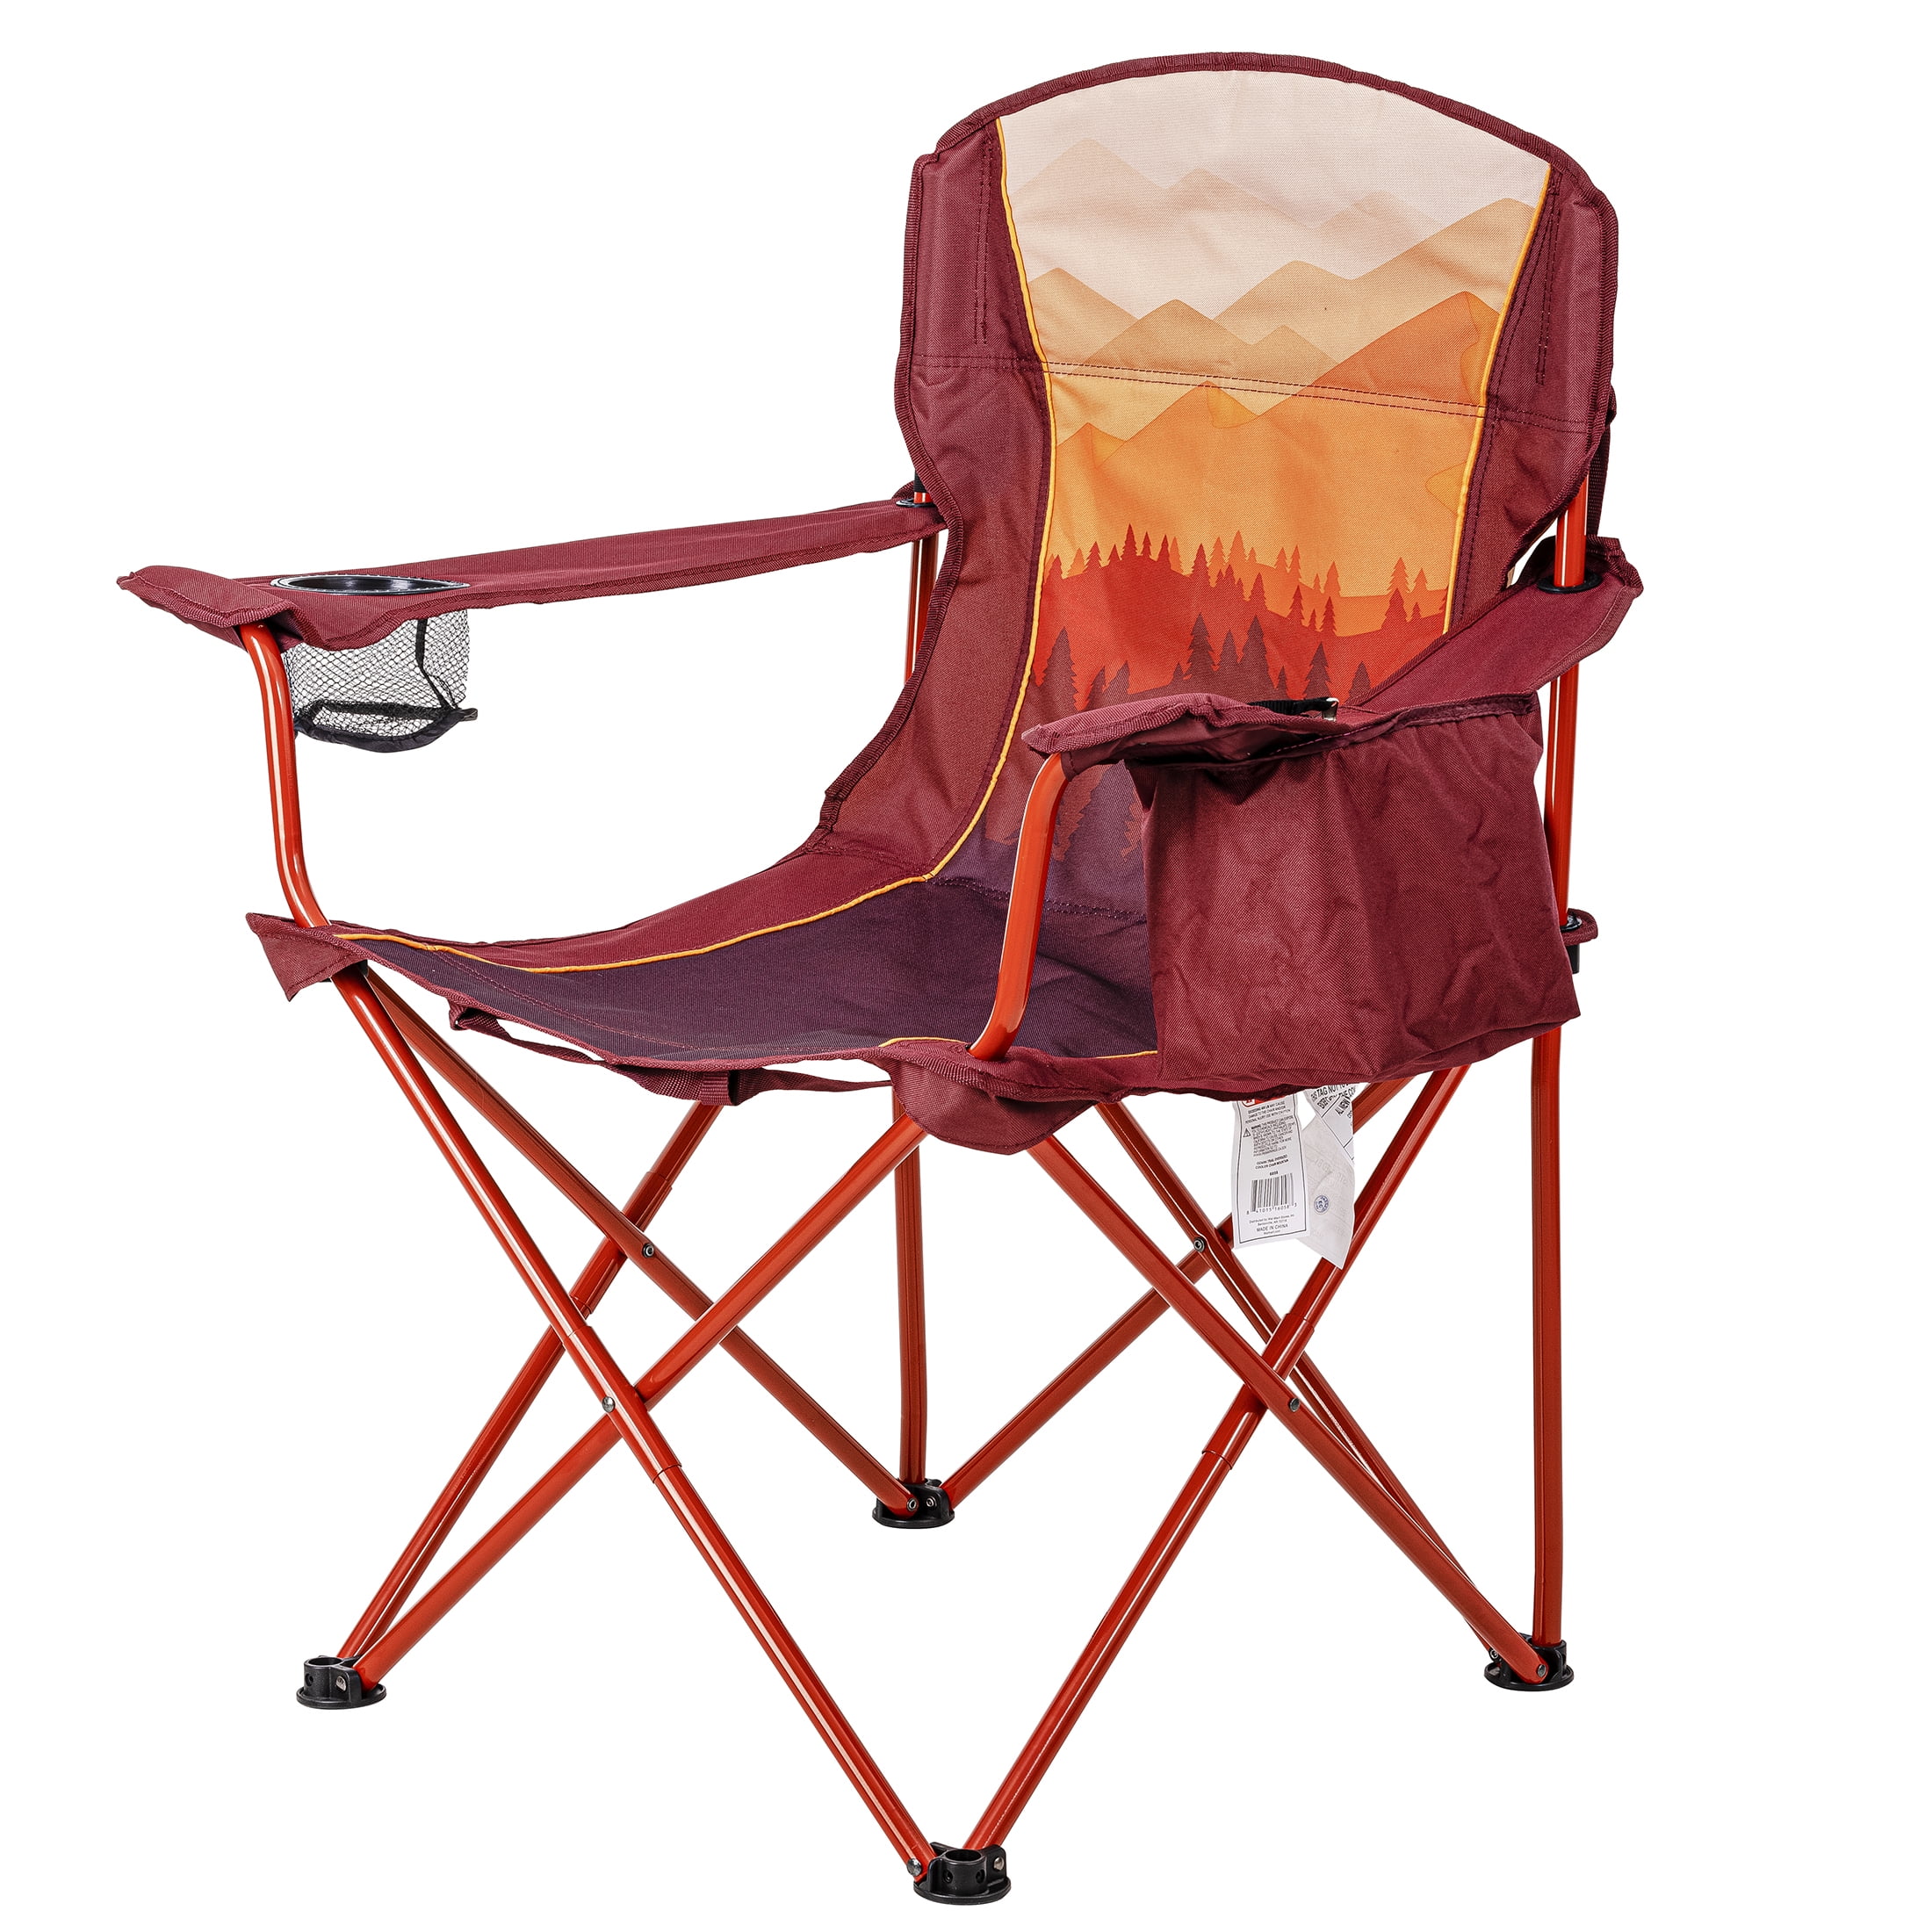 Camp Chair S'mores Camping Adult Folding Marshmallow Drink Phone Holder Bag Red 